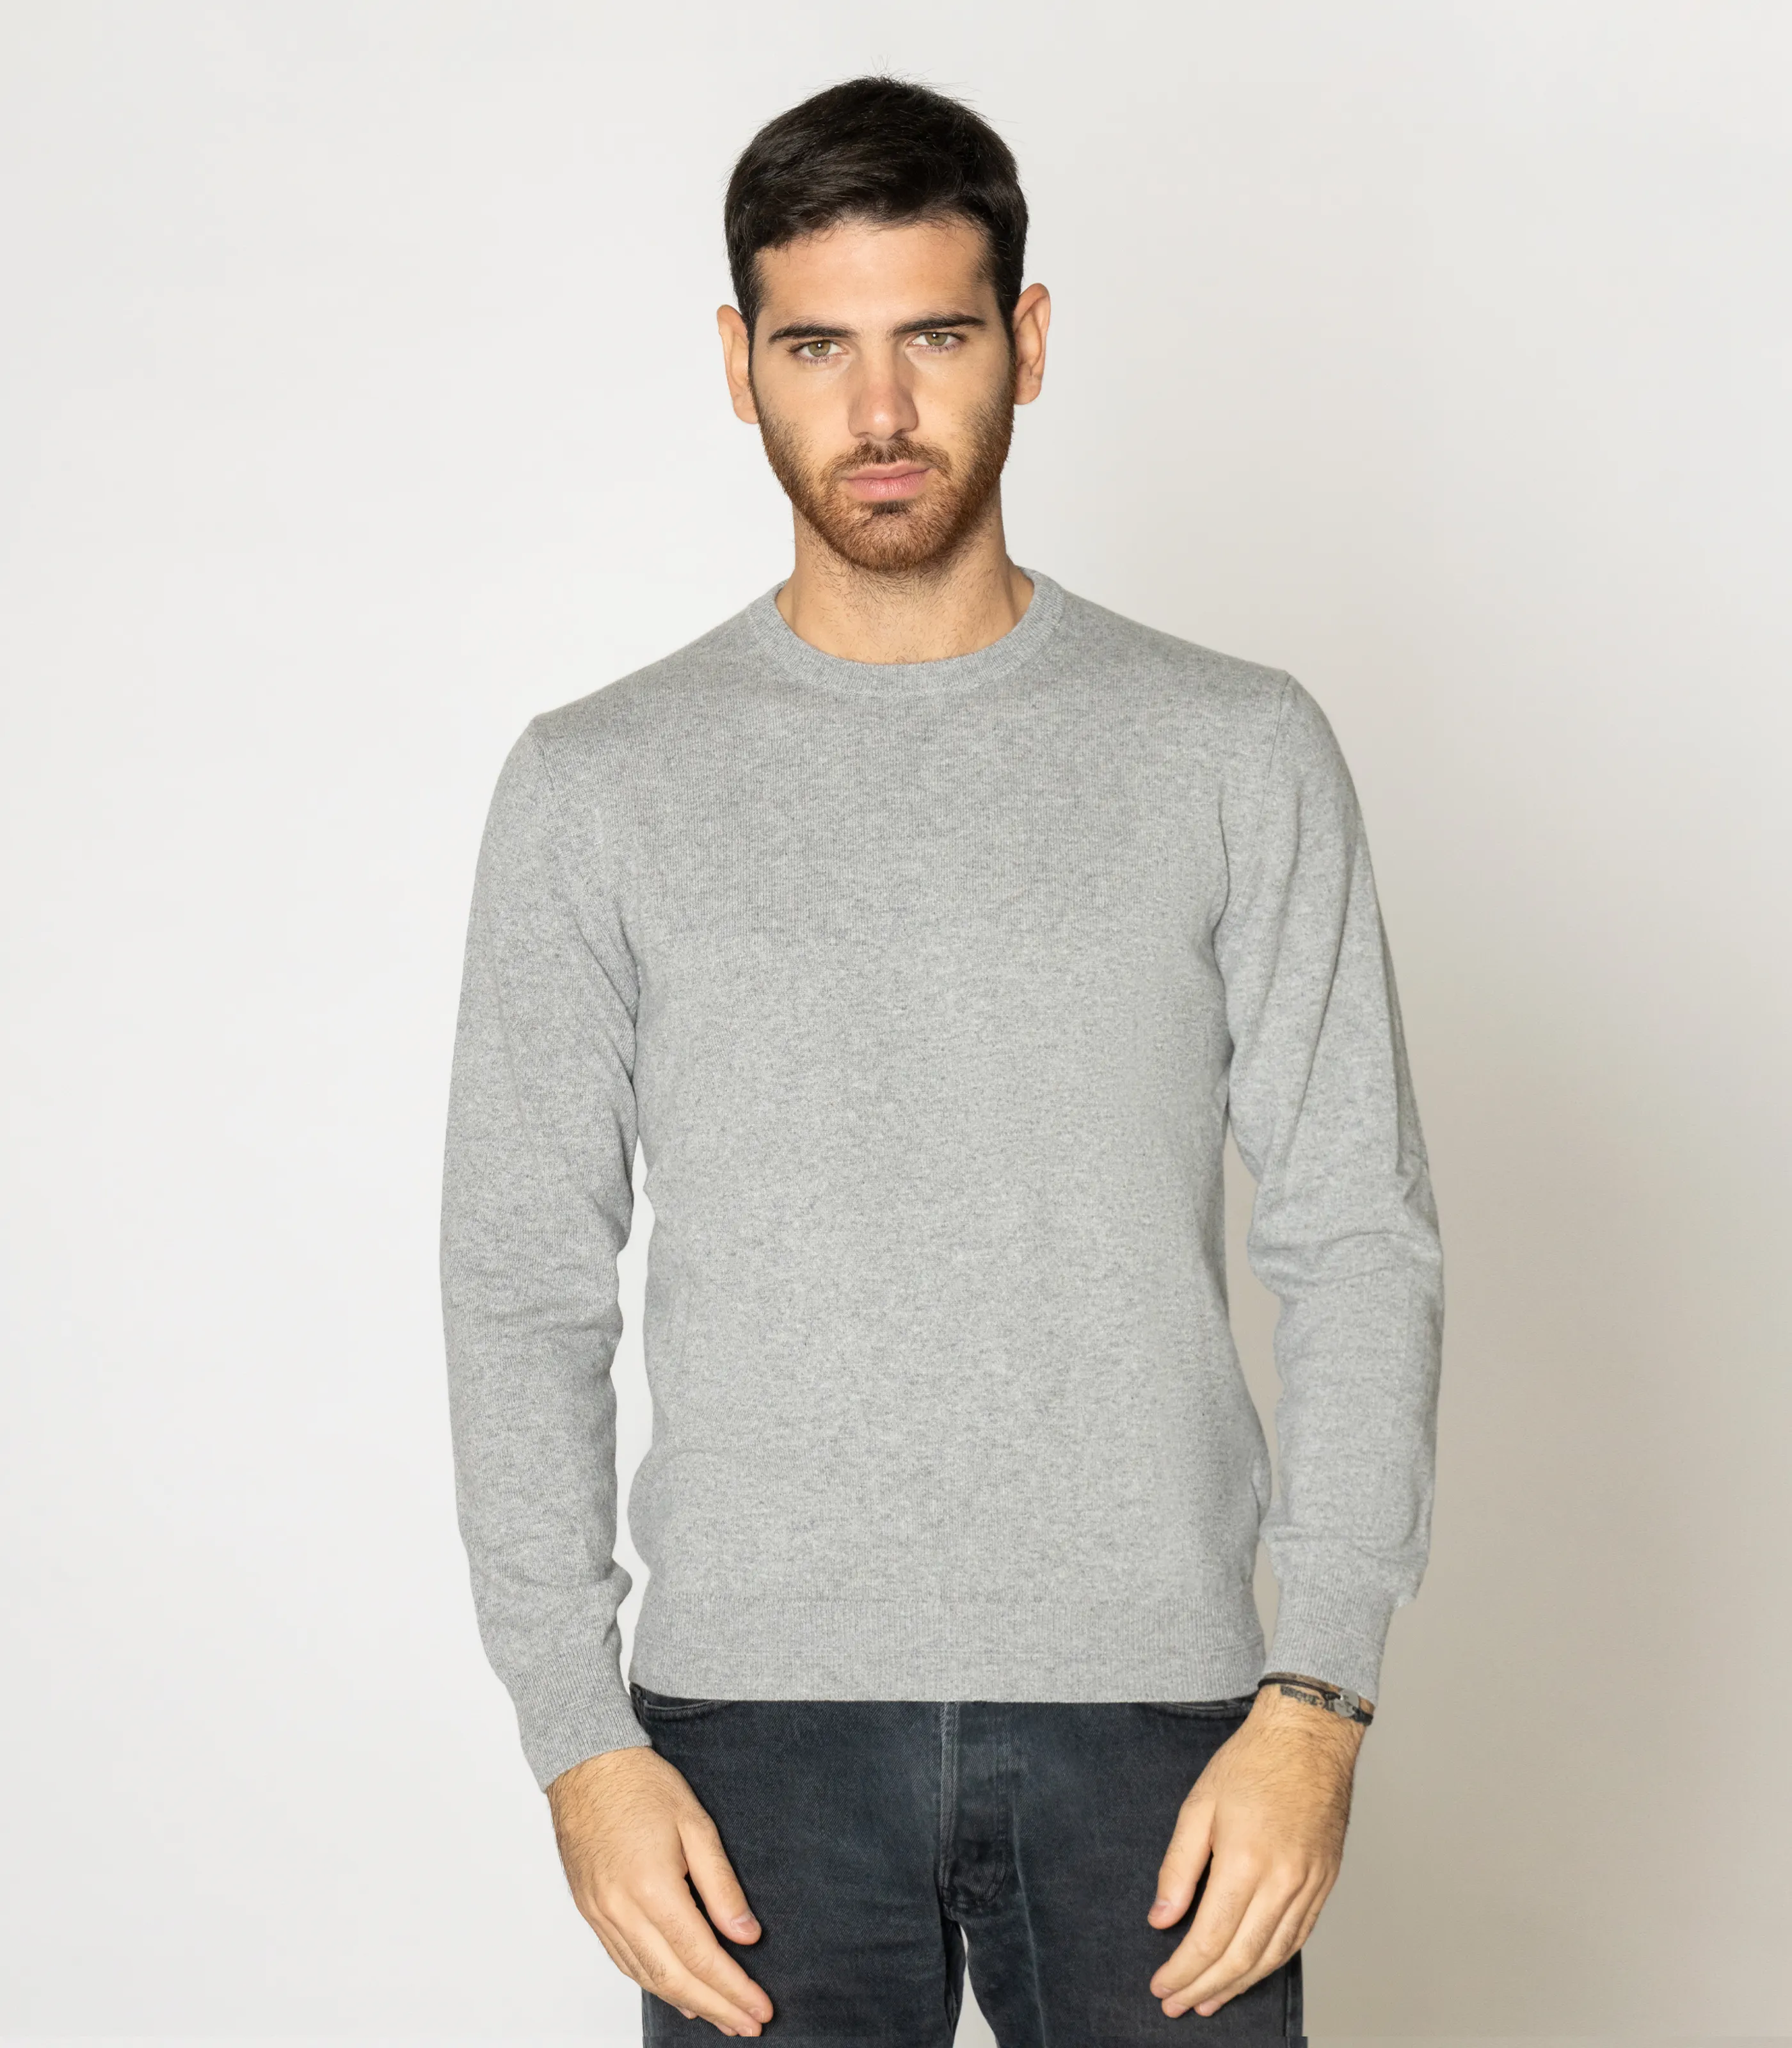 Made in Italy high quality 100% pure cashmere yarn long sleeve crew neck light grey men's sweaters